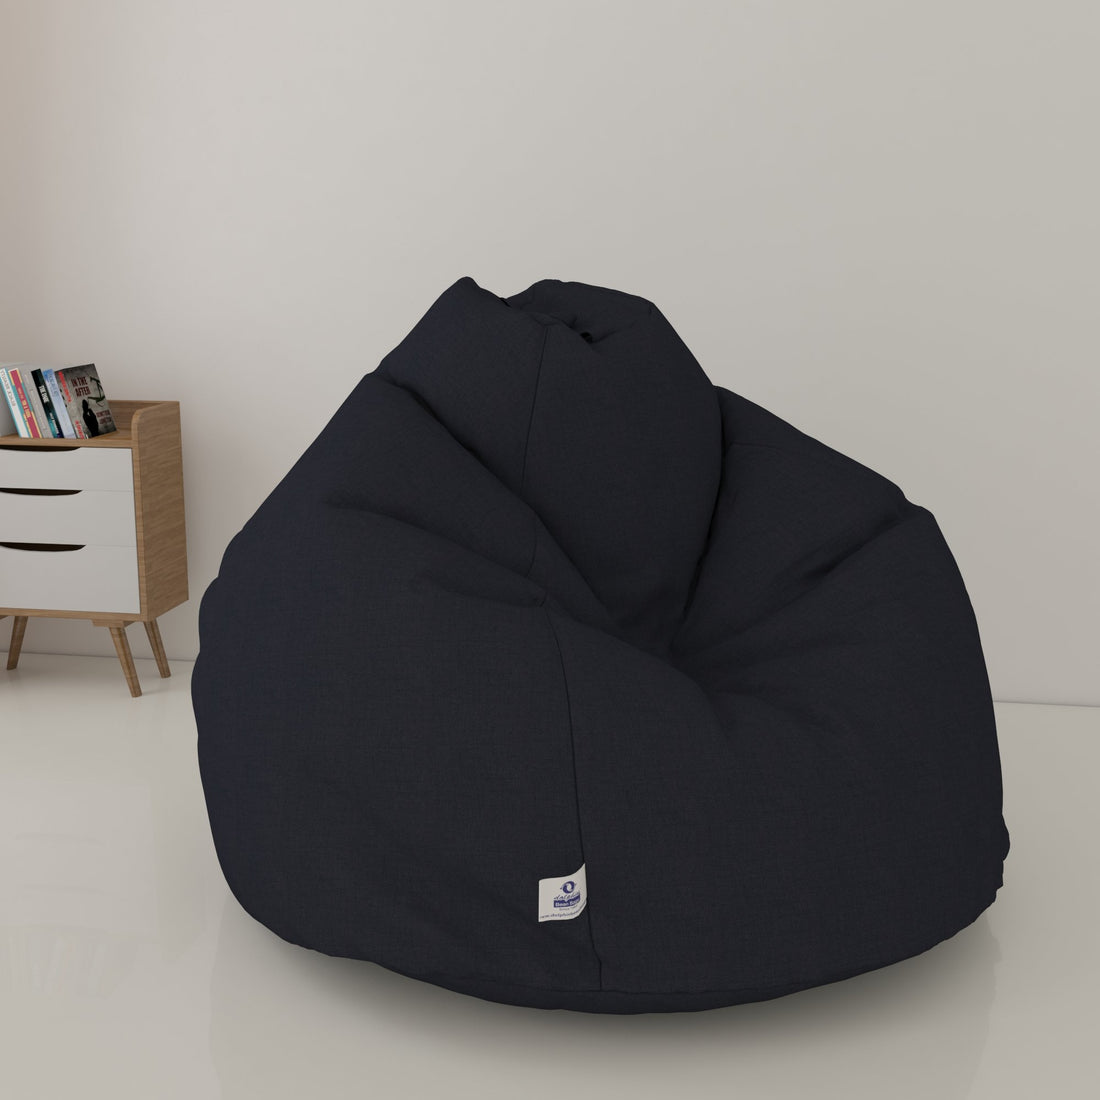 Step By Step Instructions To Use A Bean Bags Lounger In Any Room!